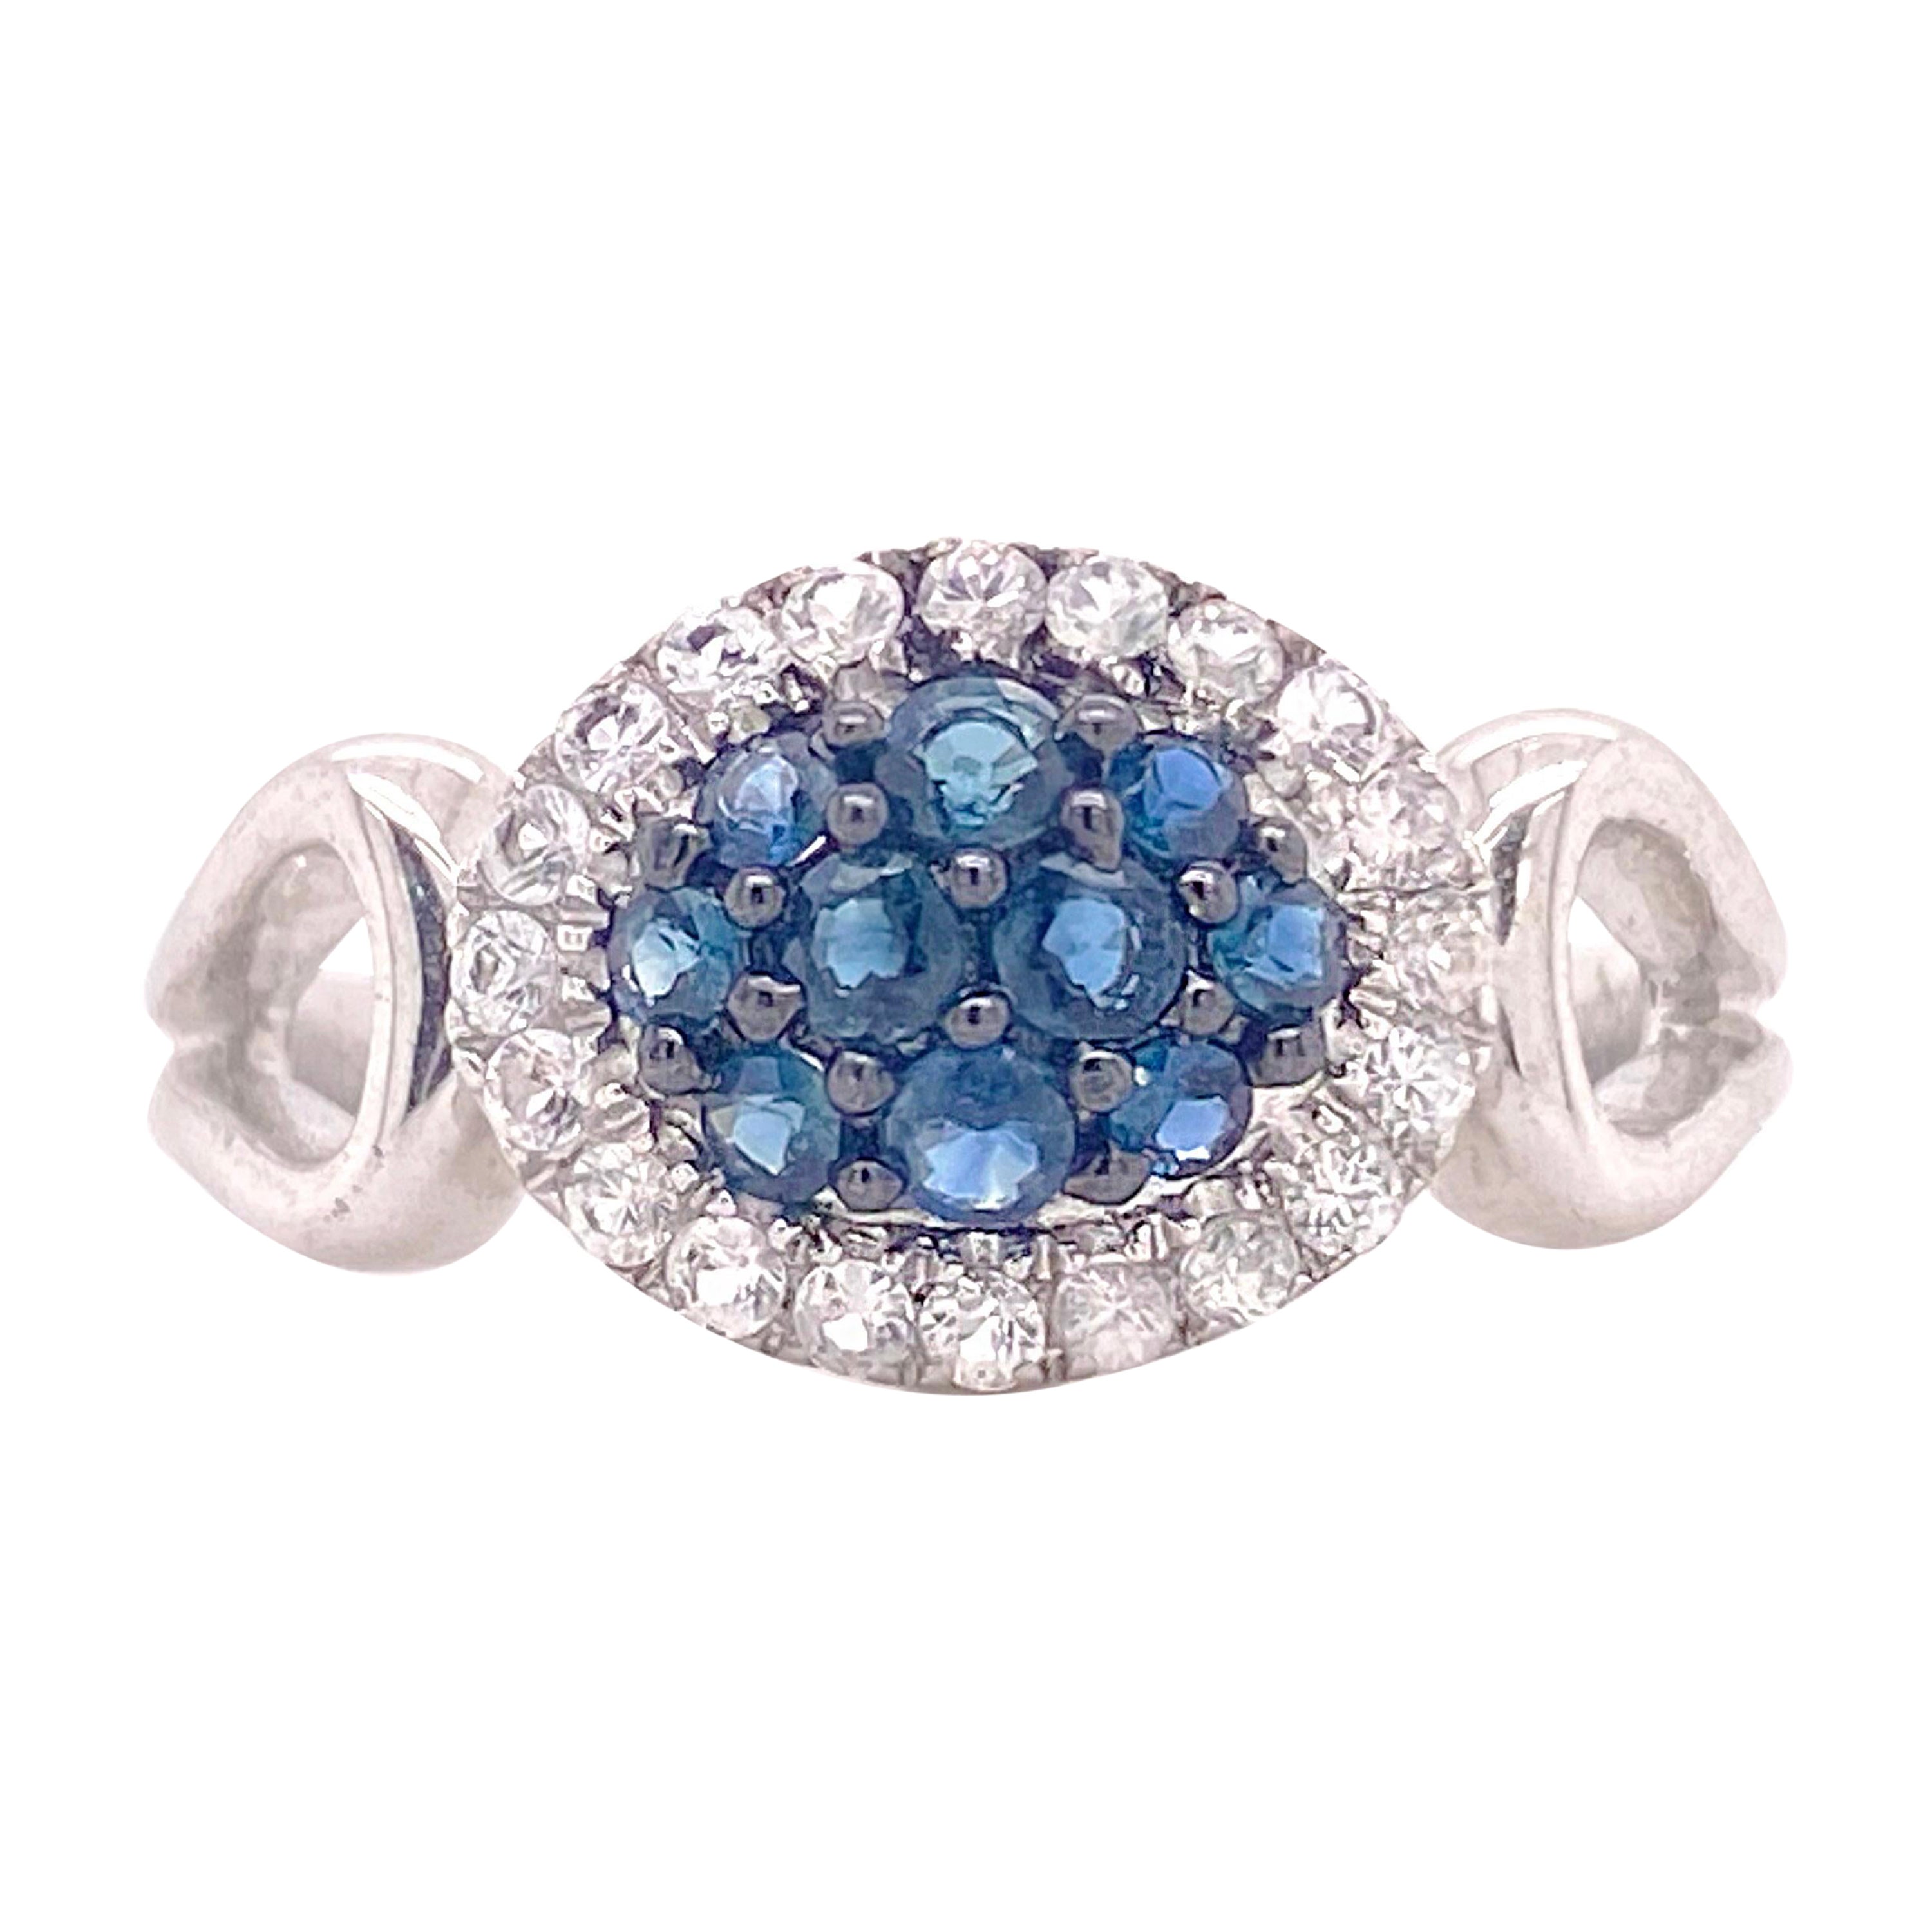 Sapphire Ring, Sterling Silver with White and Blue Sapphires